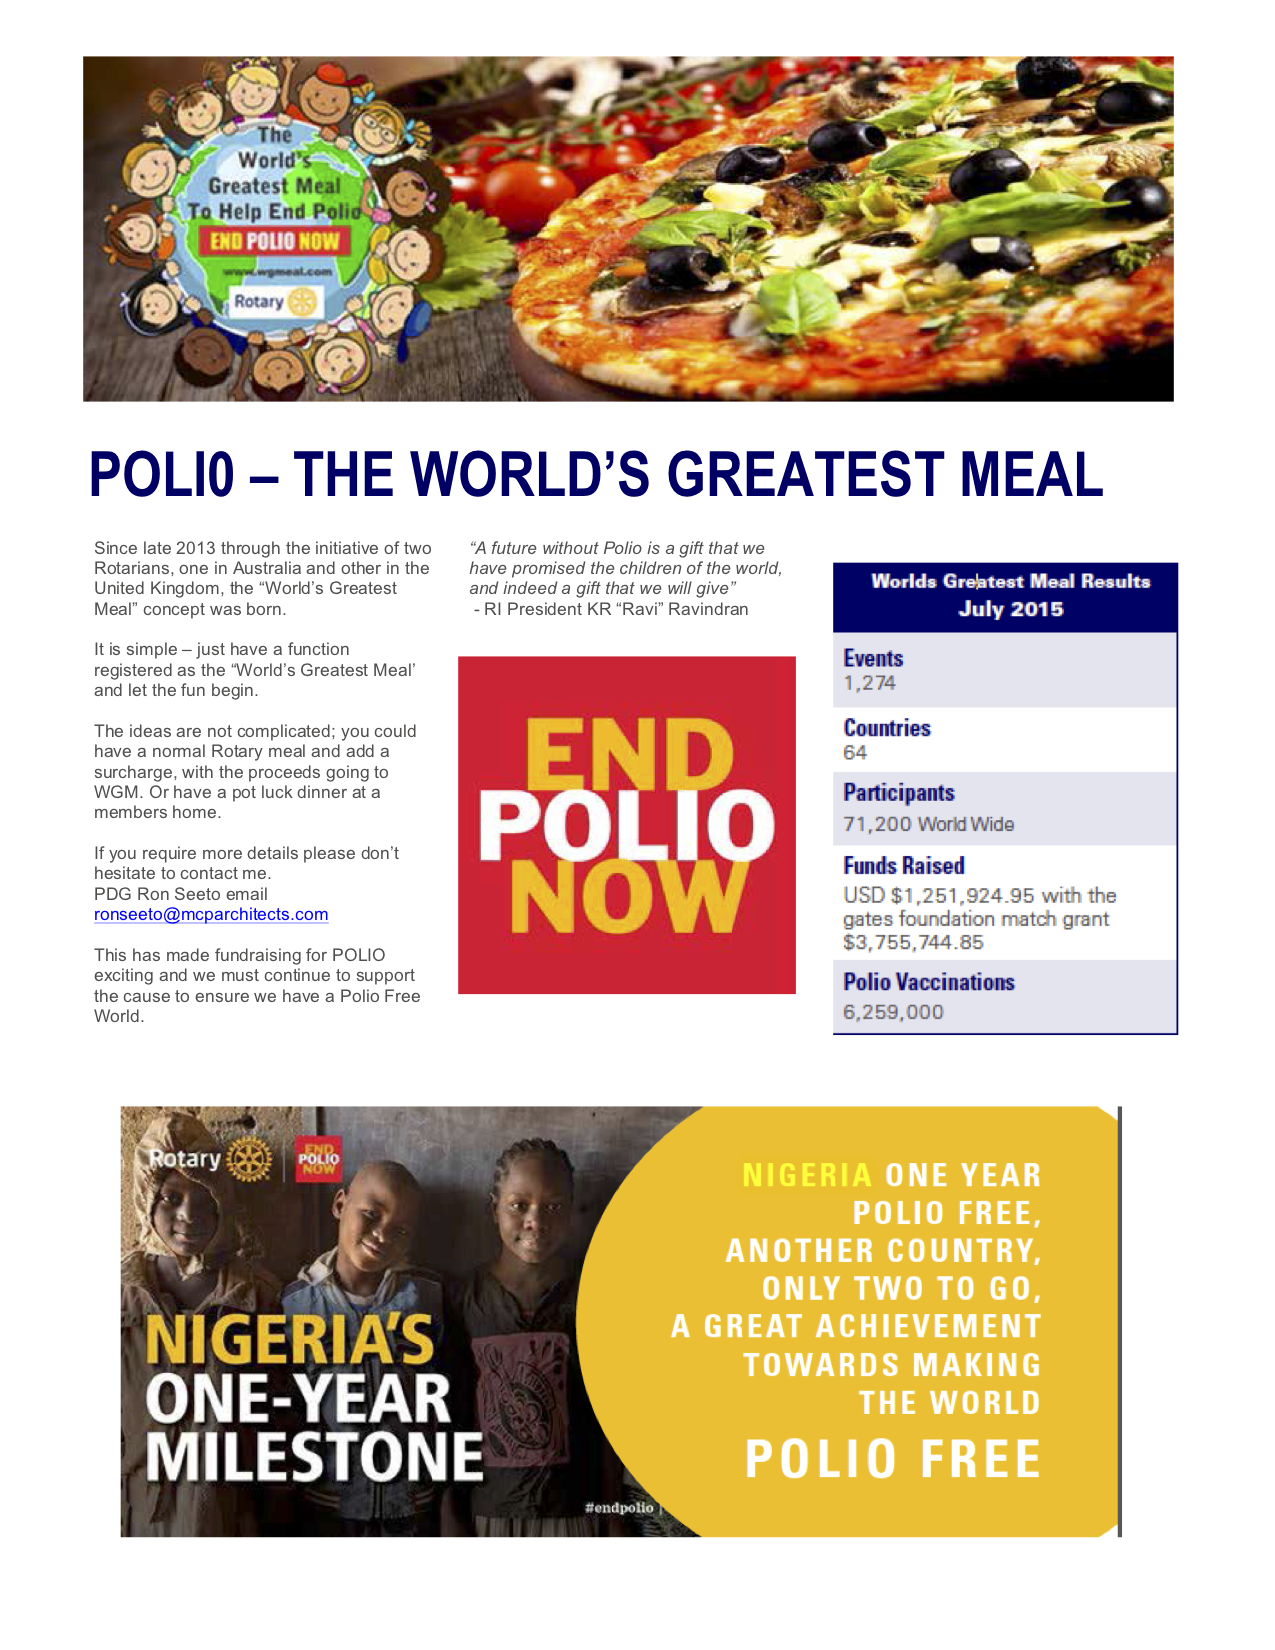 Rotary: World's Greatest Meal to Help End Polio